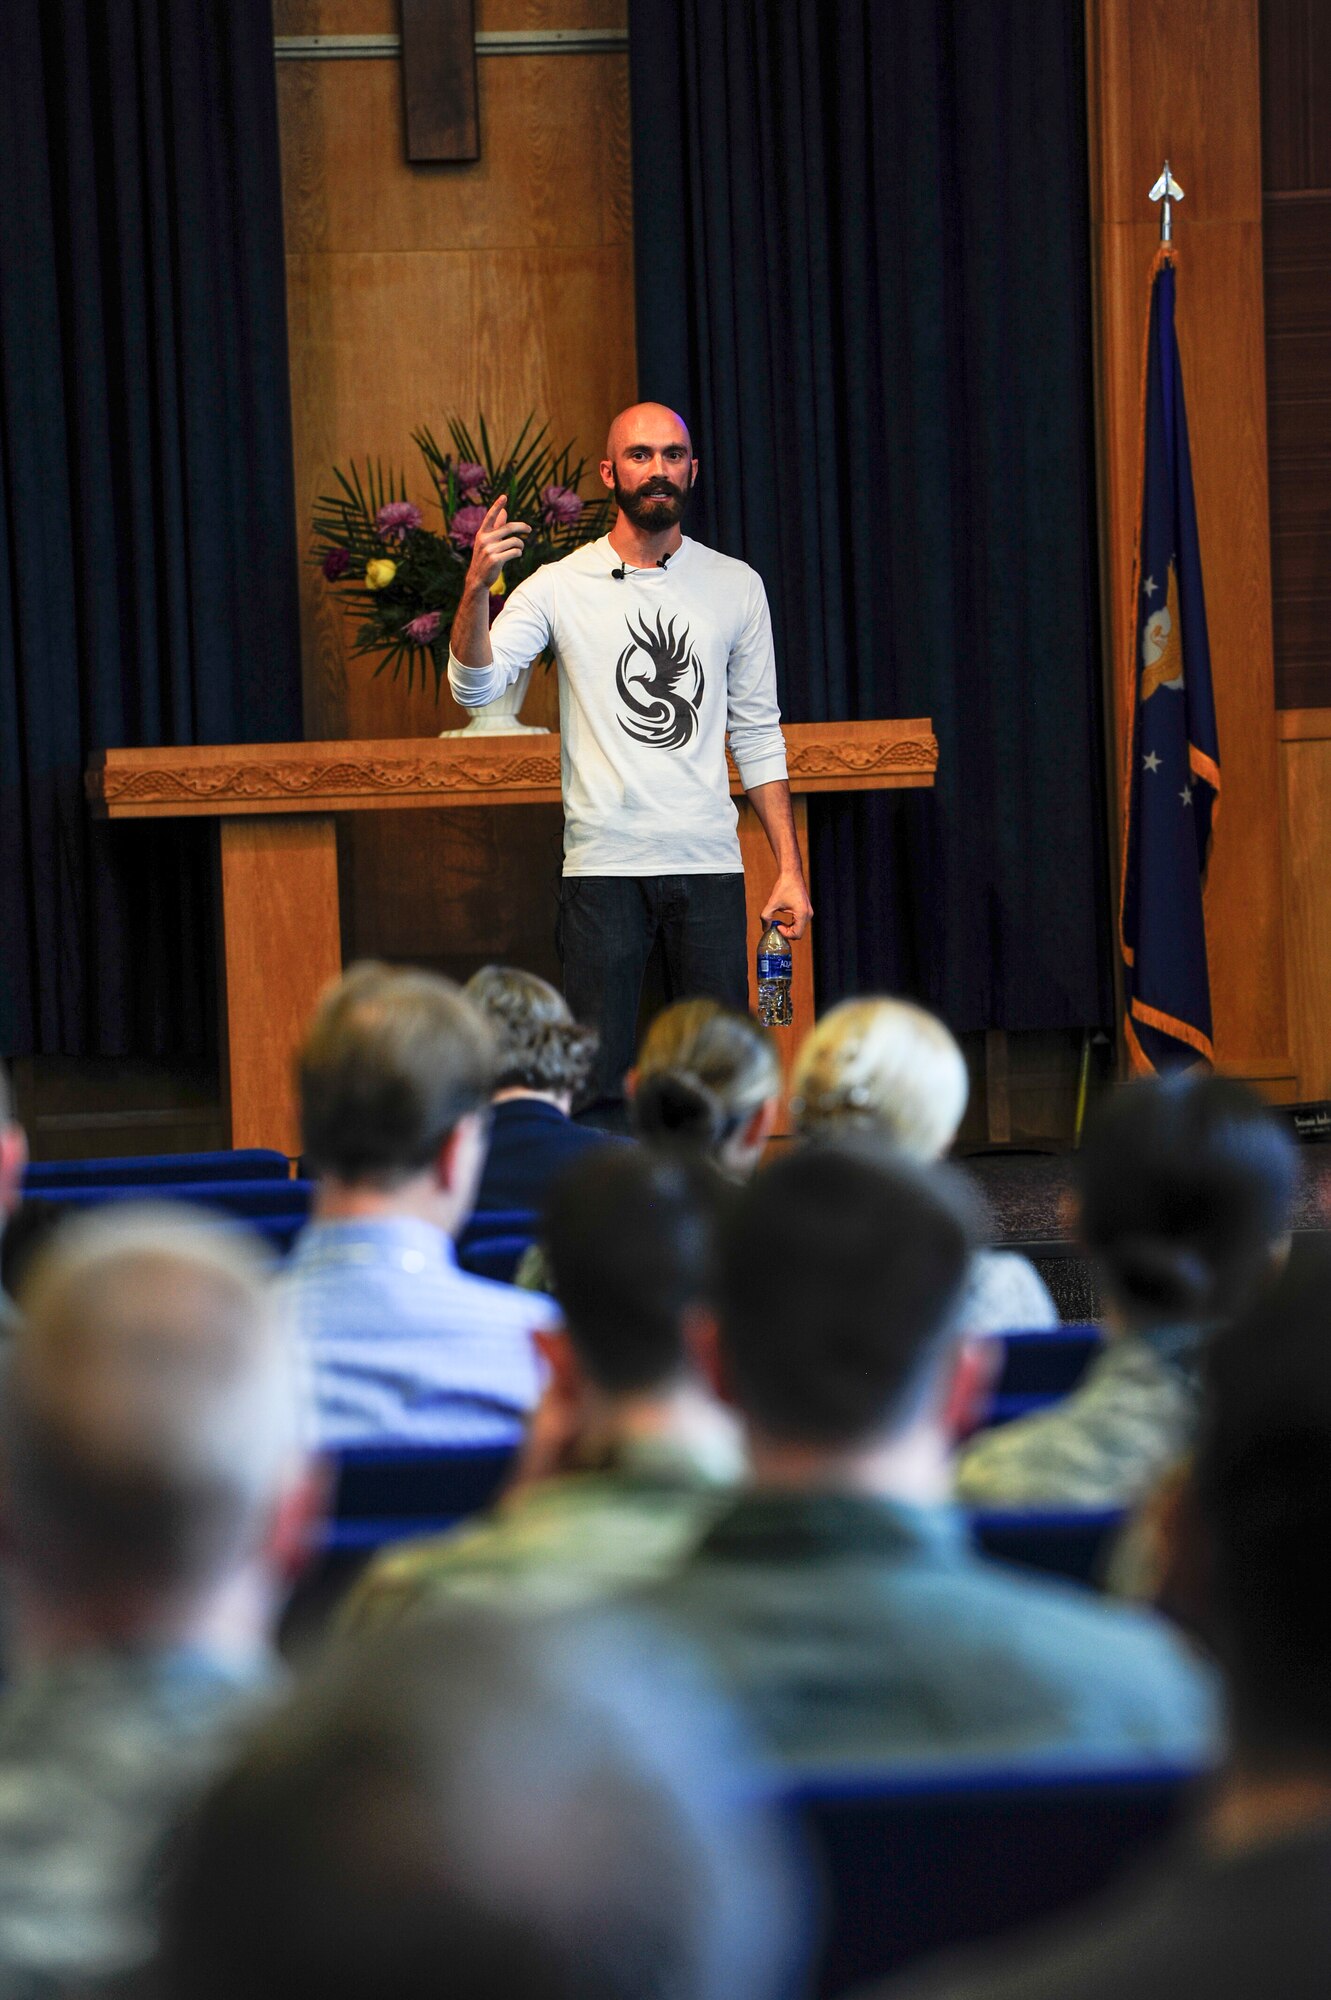 Andrew O’Brien, an Iraq War veteran and public speaker, shares his message of recreating a positive life from negative experiences at Joint Base San Antonio-Randolph, Texas, Sept. 10, 2019.  O’Brien endured a brutal childhood, testified against his mother during her murder trial and tried to end his own life; with this speaking engagement he shared his resilience and forgiveness to an audience of military members and civilians.